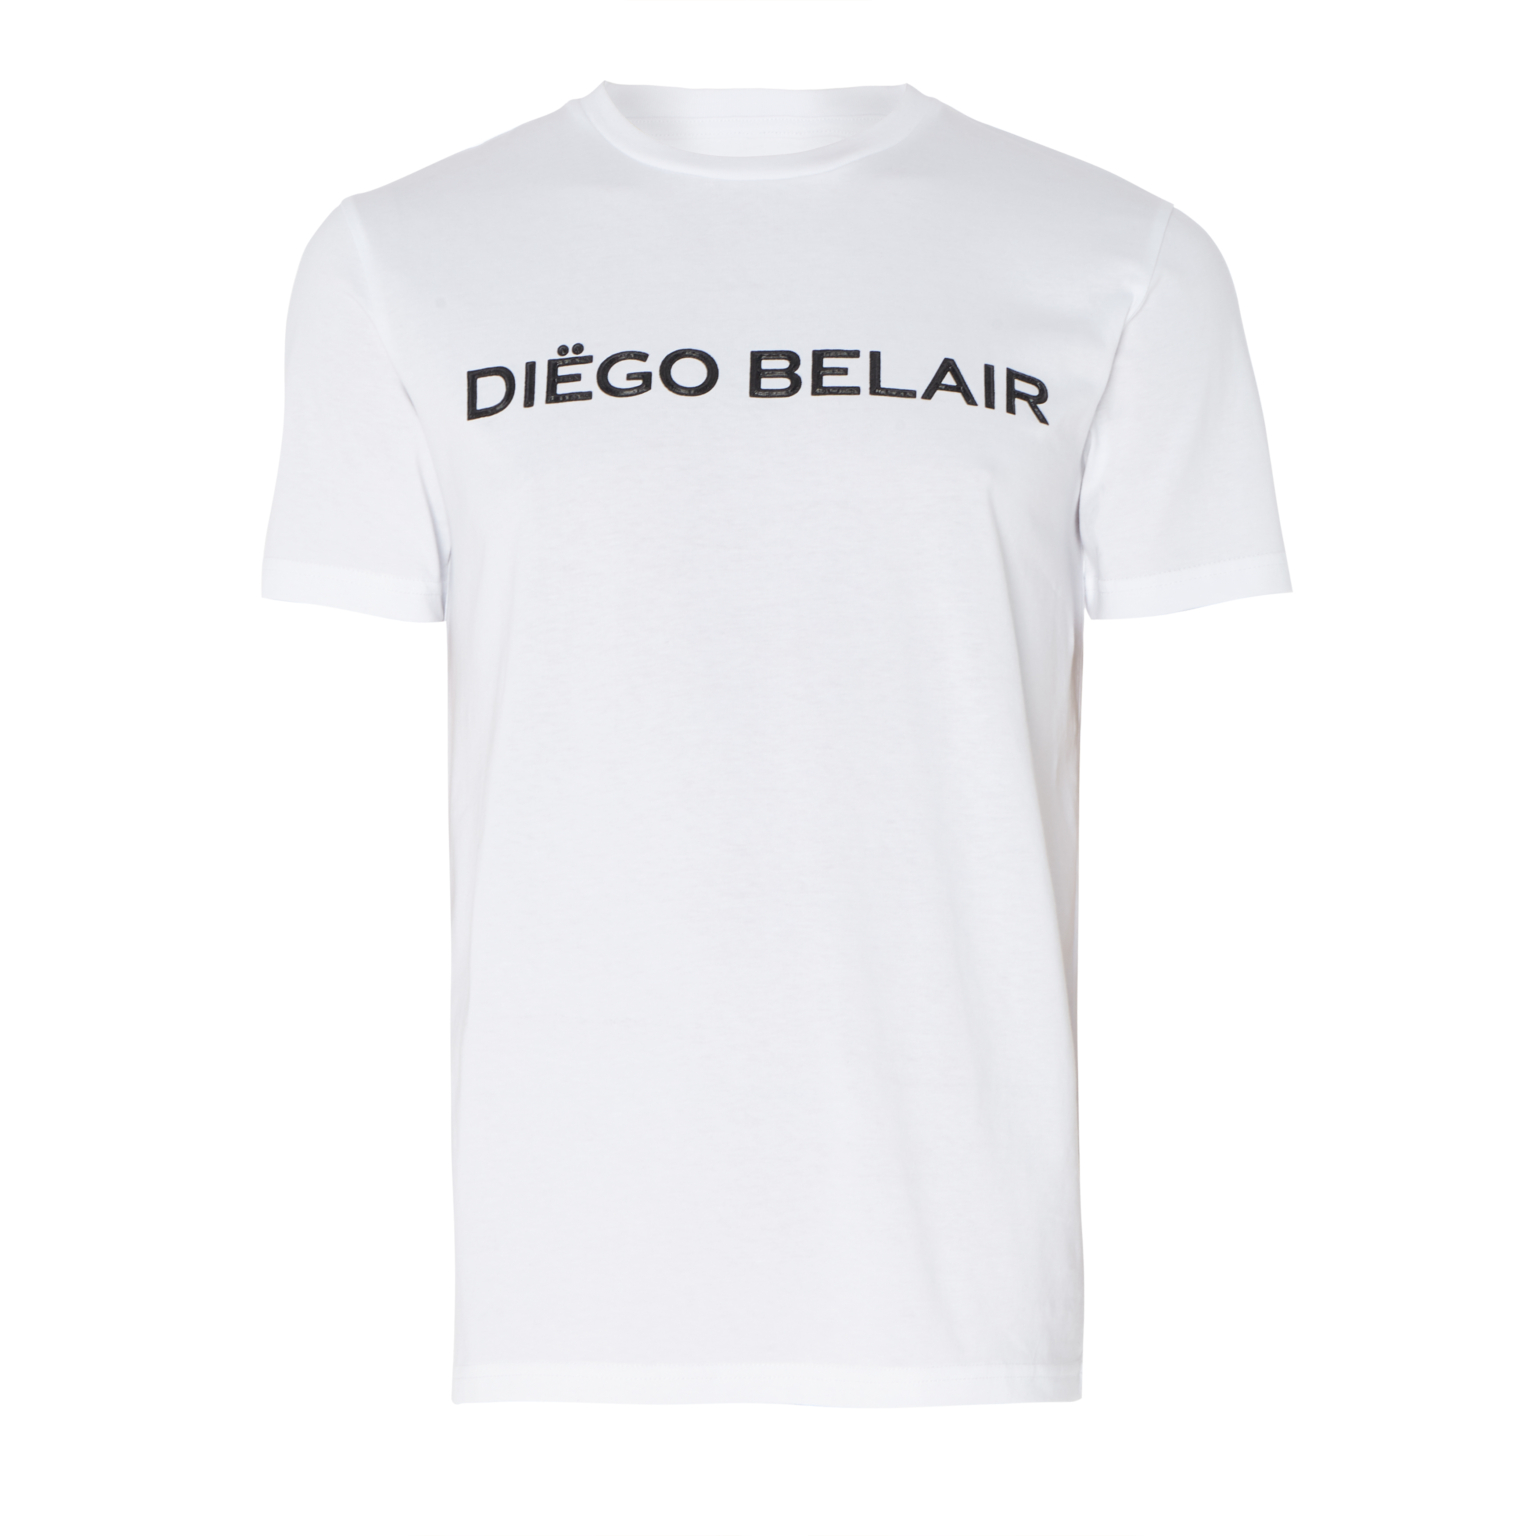 Diego Belair men's white t-shirt with brand name on the front.